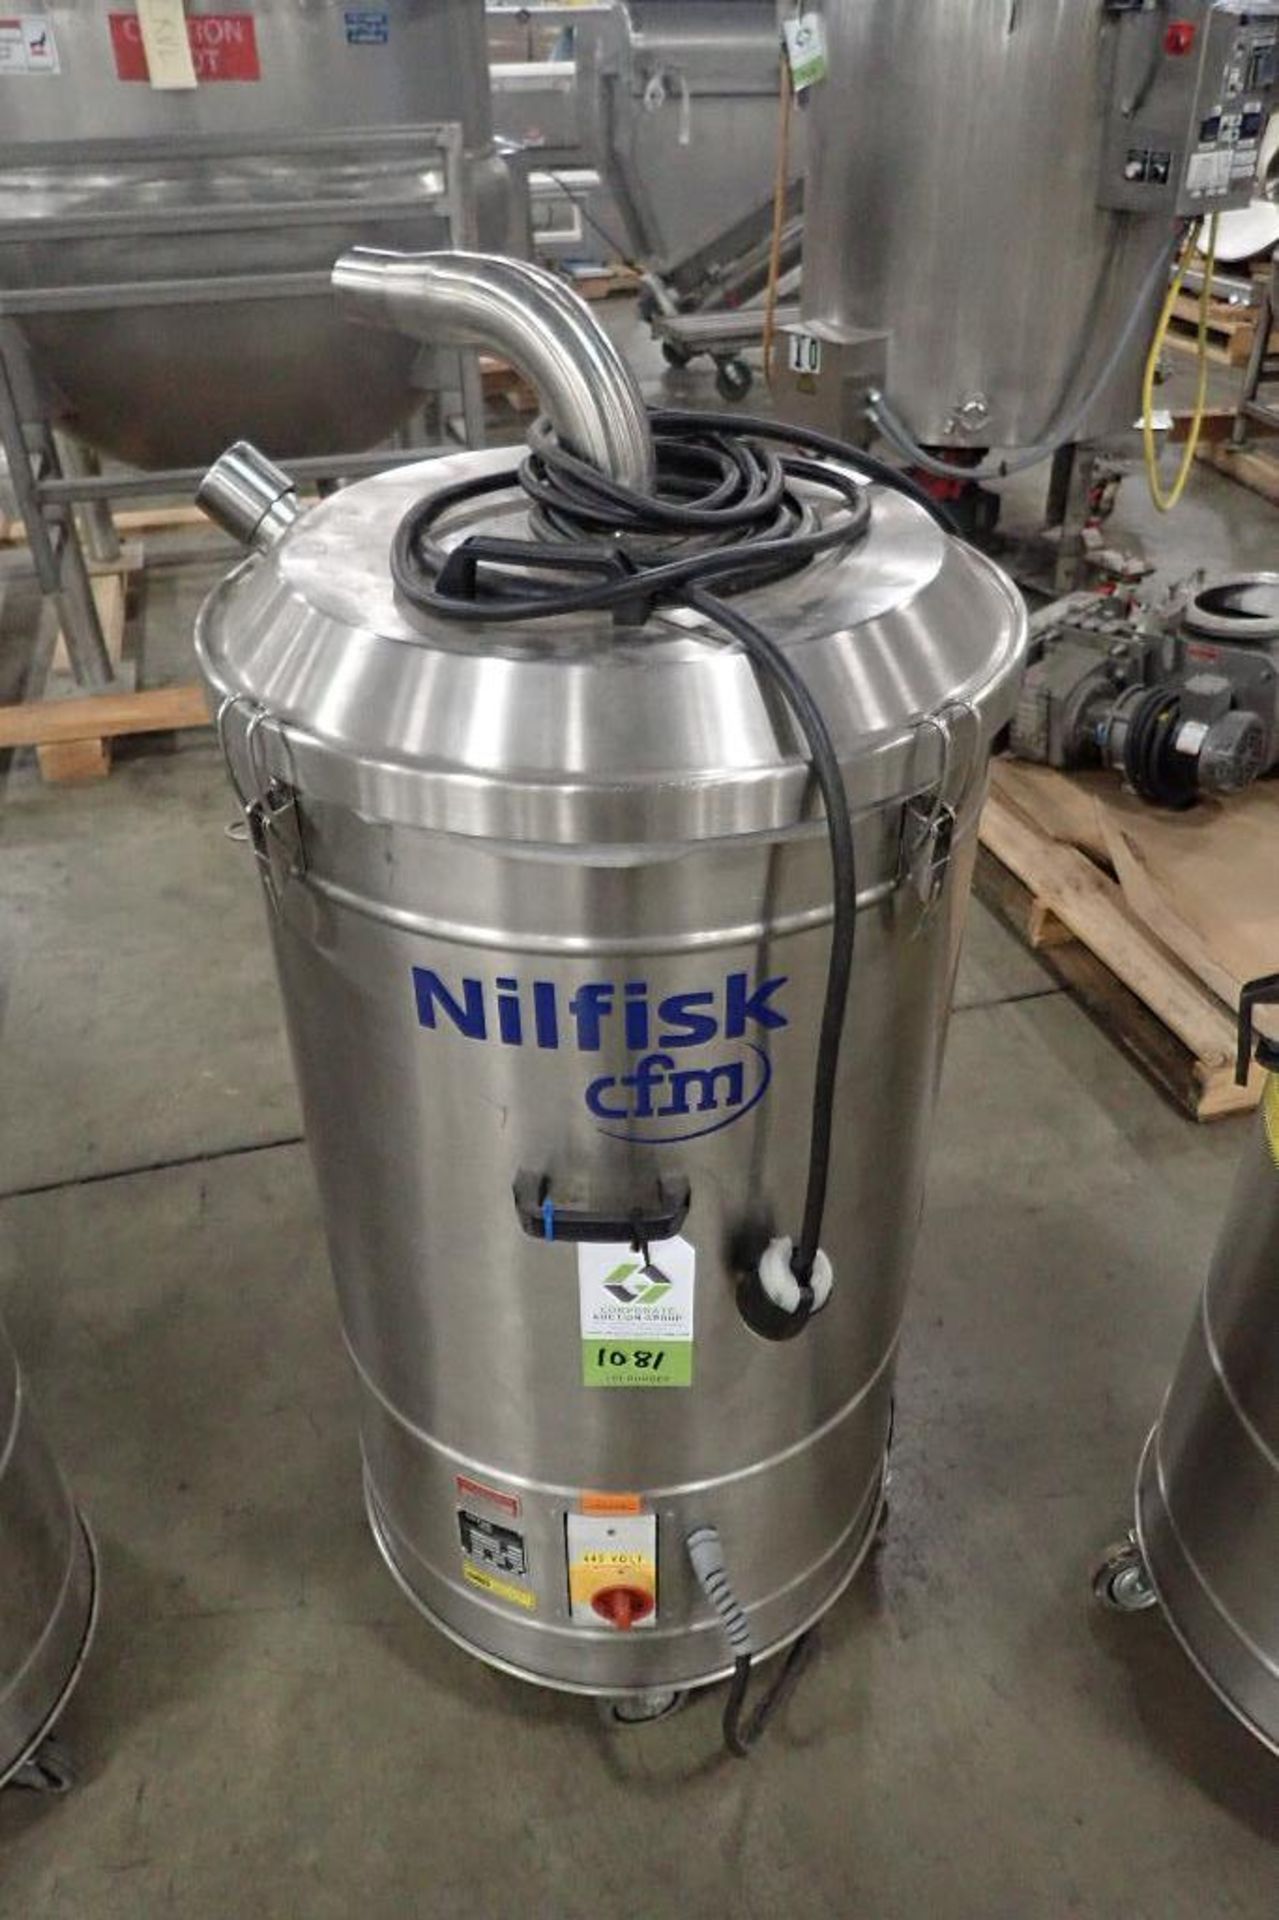 Nilfisk commercial vacuum, Type R305X, SN 04AK429. **Rigging Fee: $25** (Located in 3703 - Eagan, MN